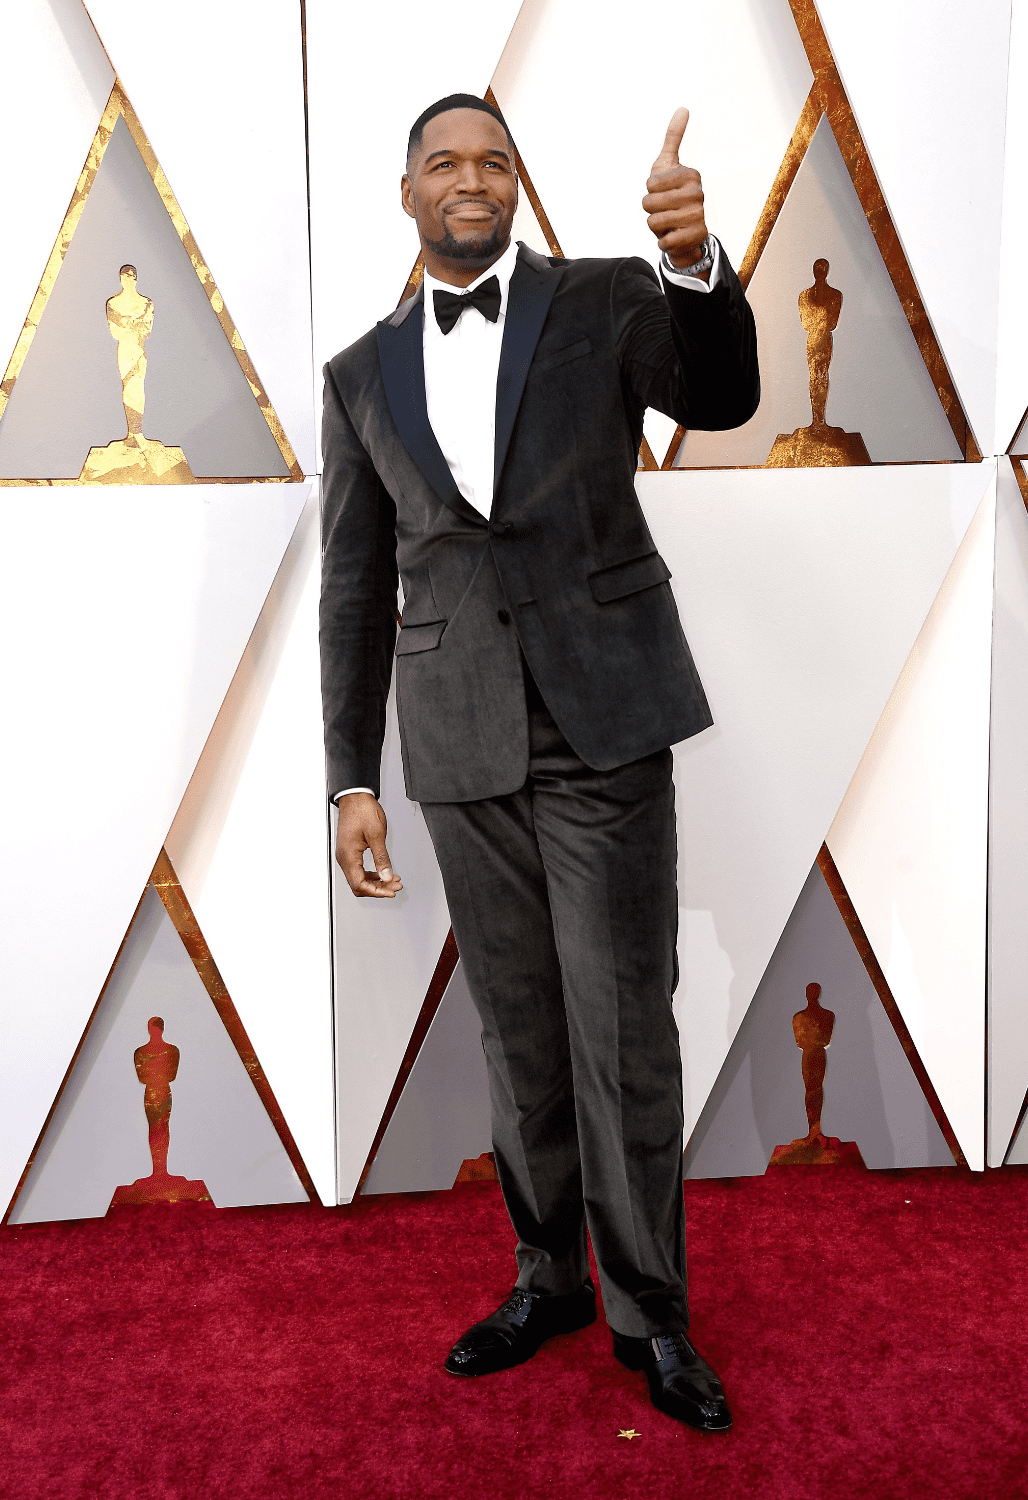 TV host and former football player Michael Strahan attends the 90th Annual Academy Awards in March 2018 in Hollywood, California. | Photo: Getty Images